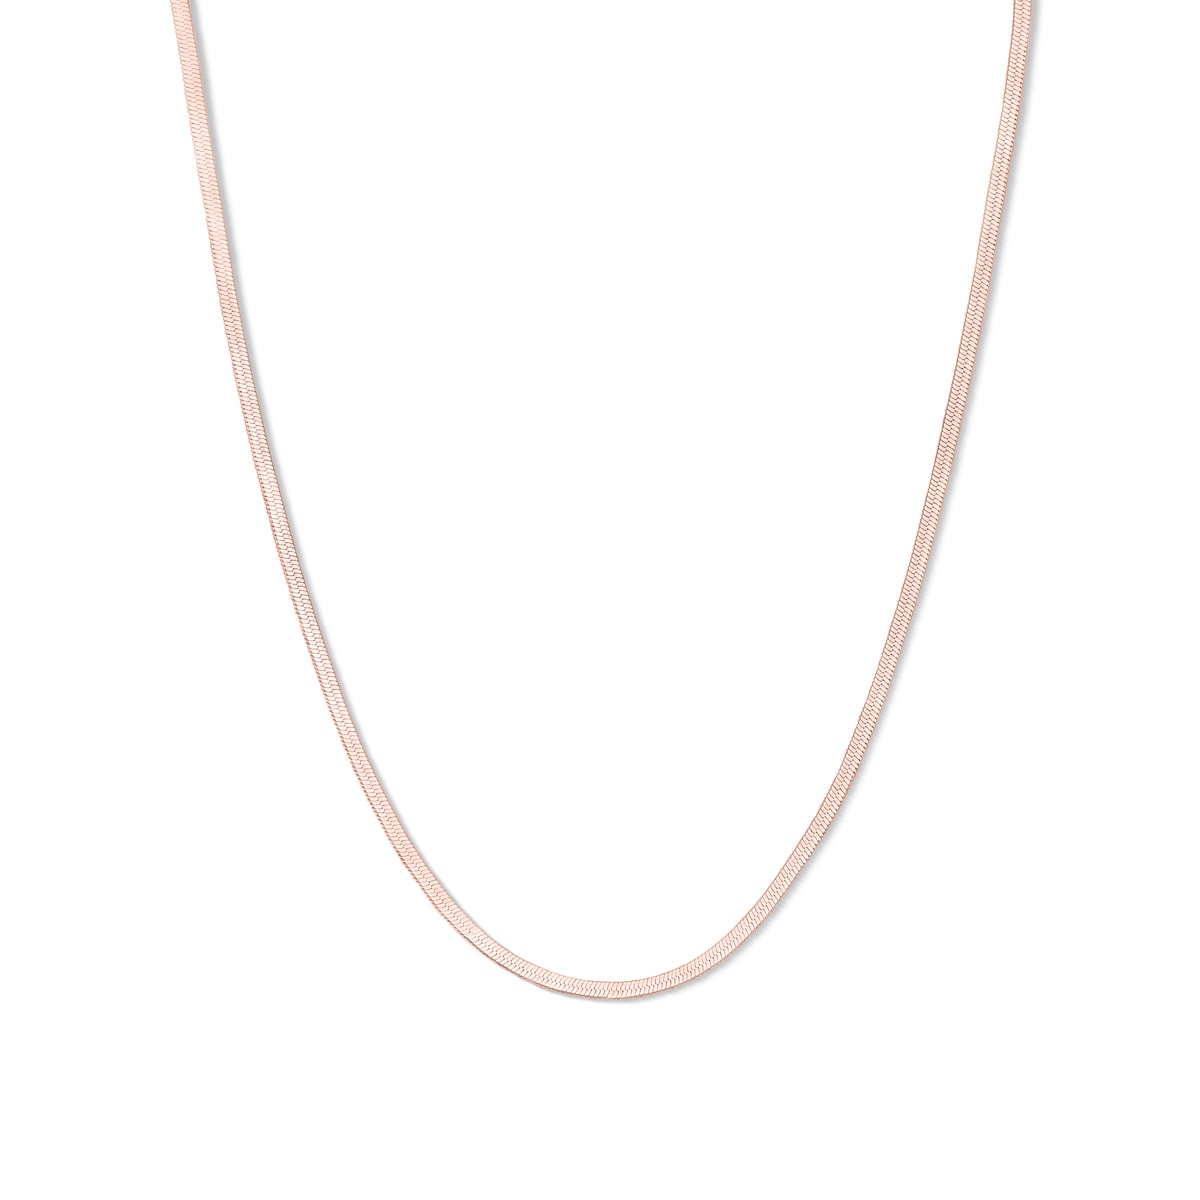 Solid rose gold chain necklace